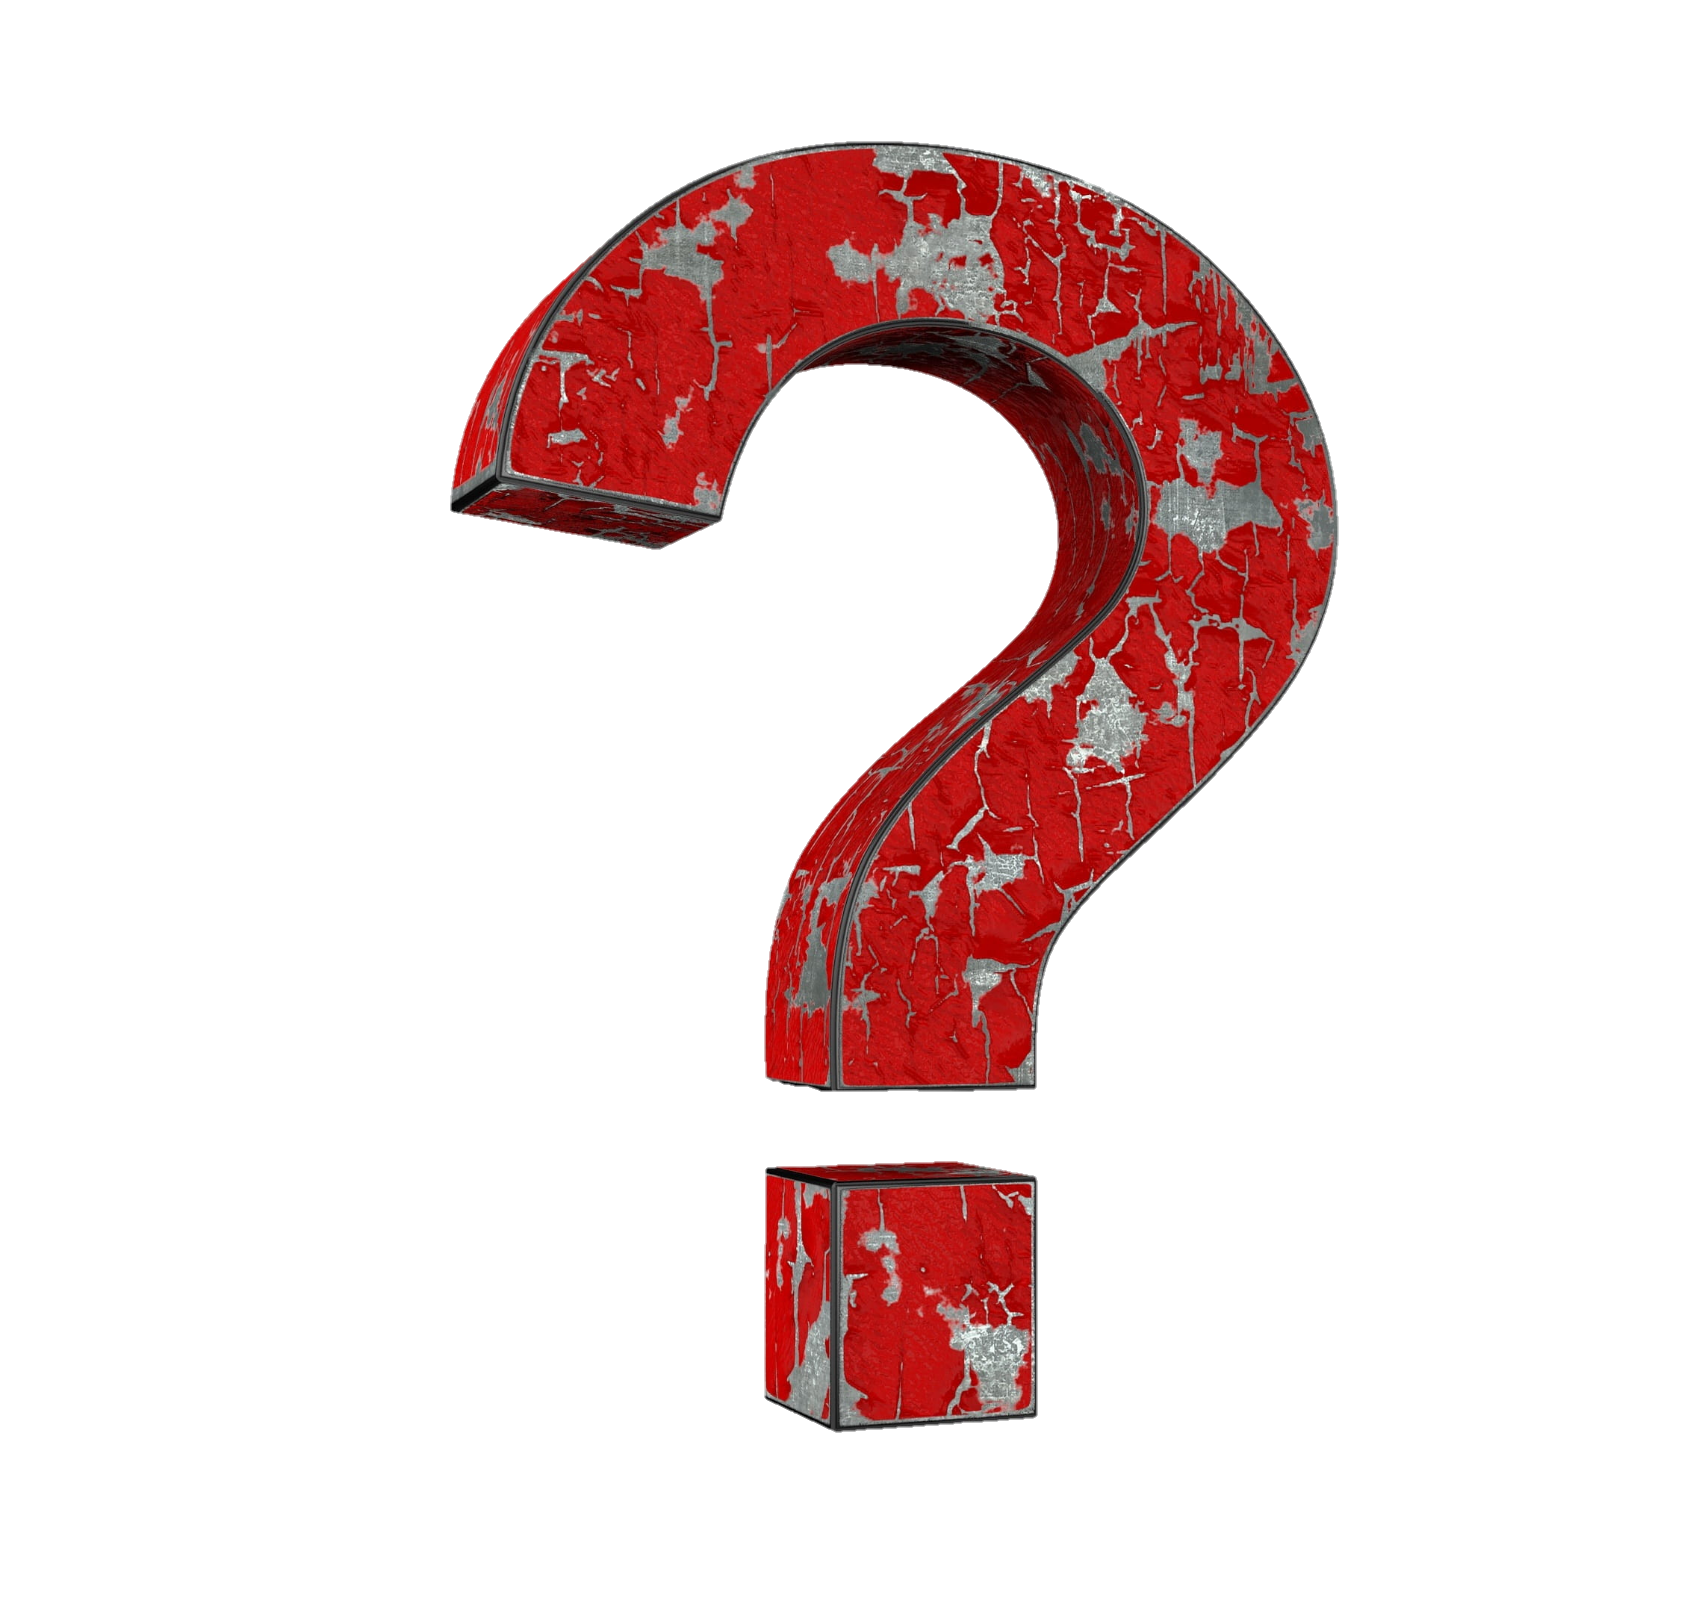 question-mark-png-from-pngfre-9-2